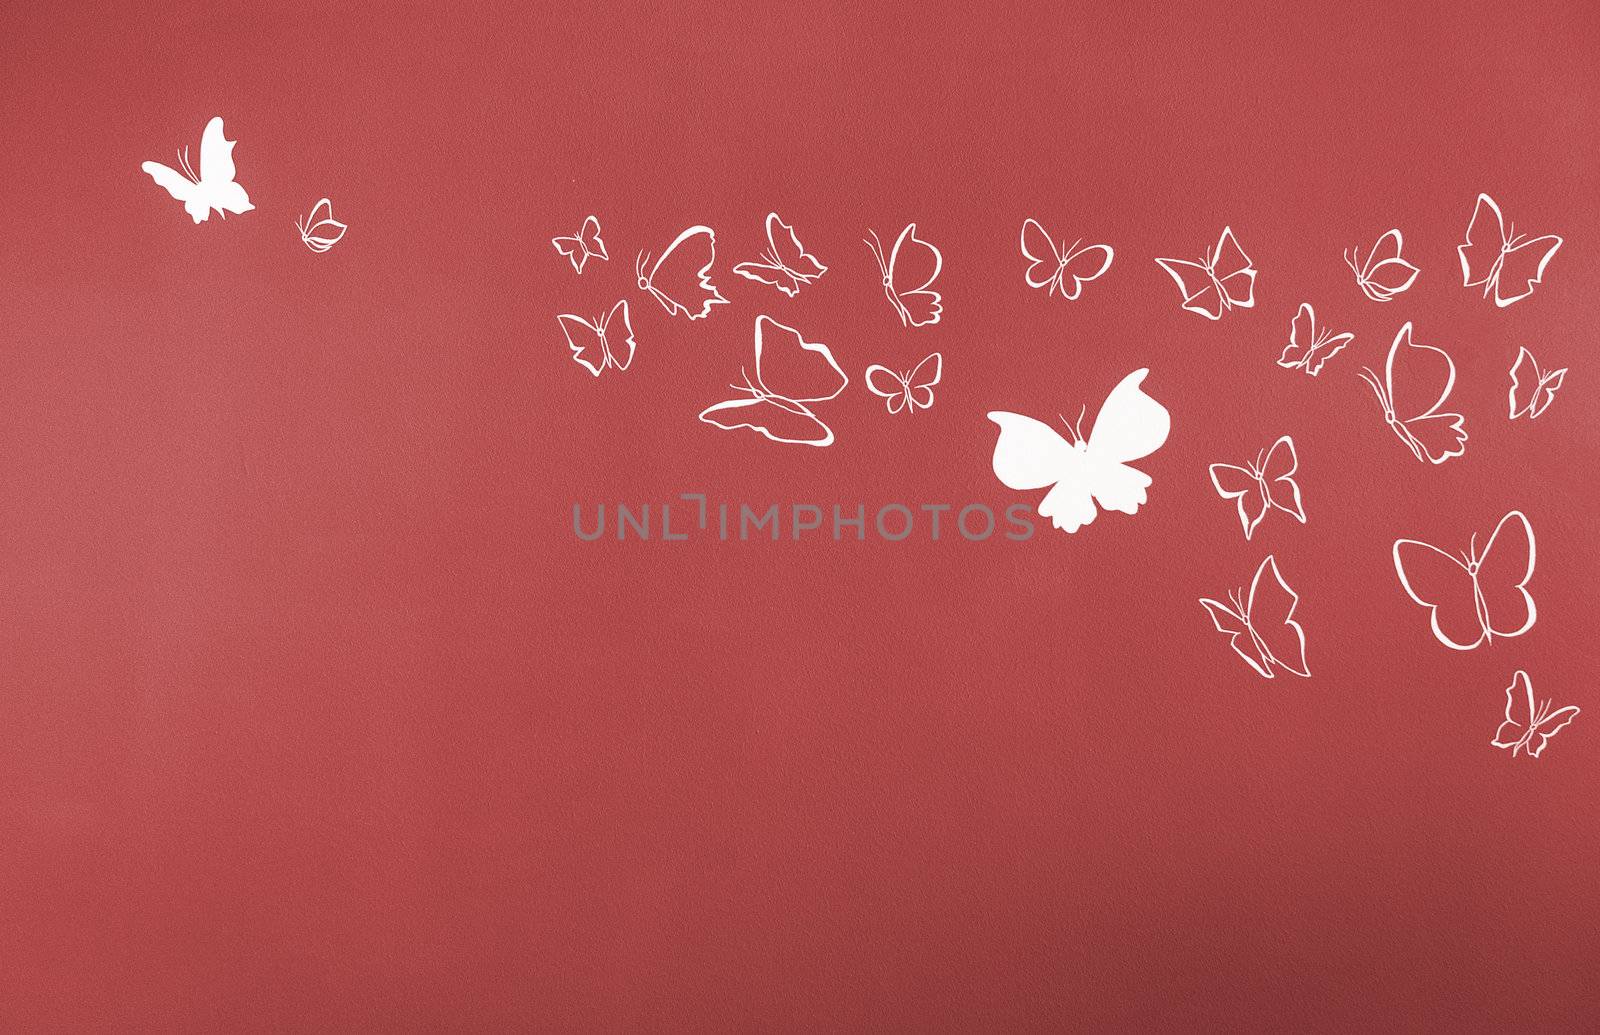 Group of white silhouettes butterflies flying over a red background